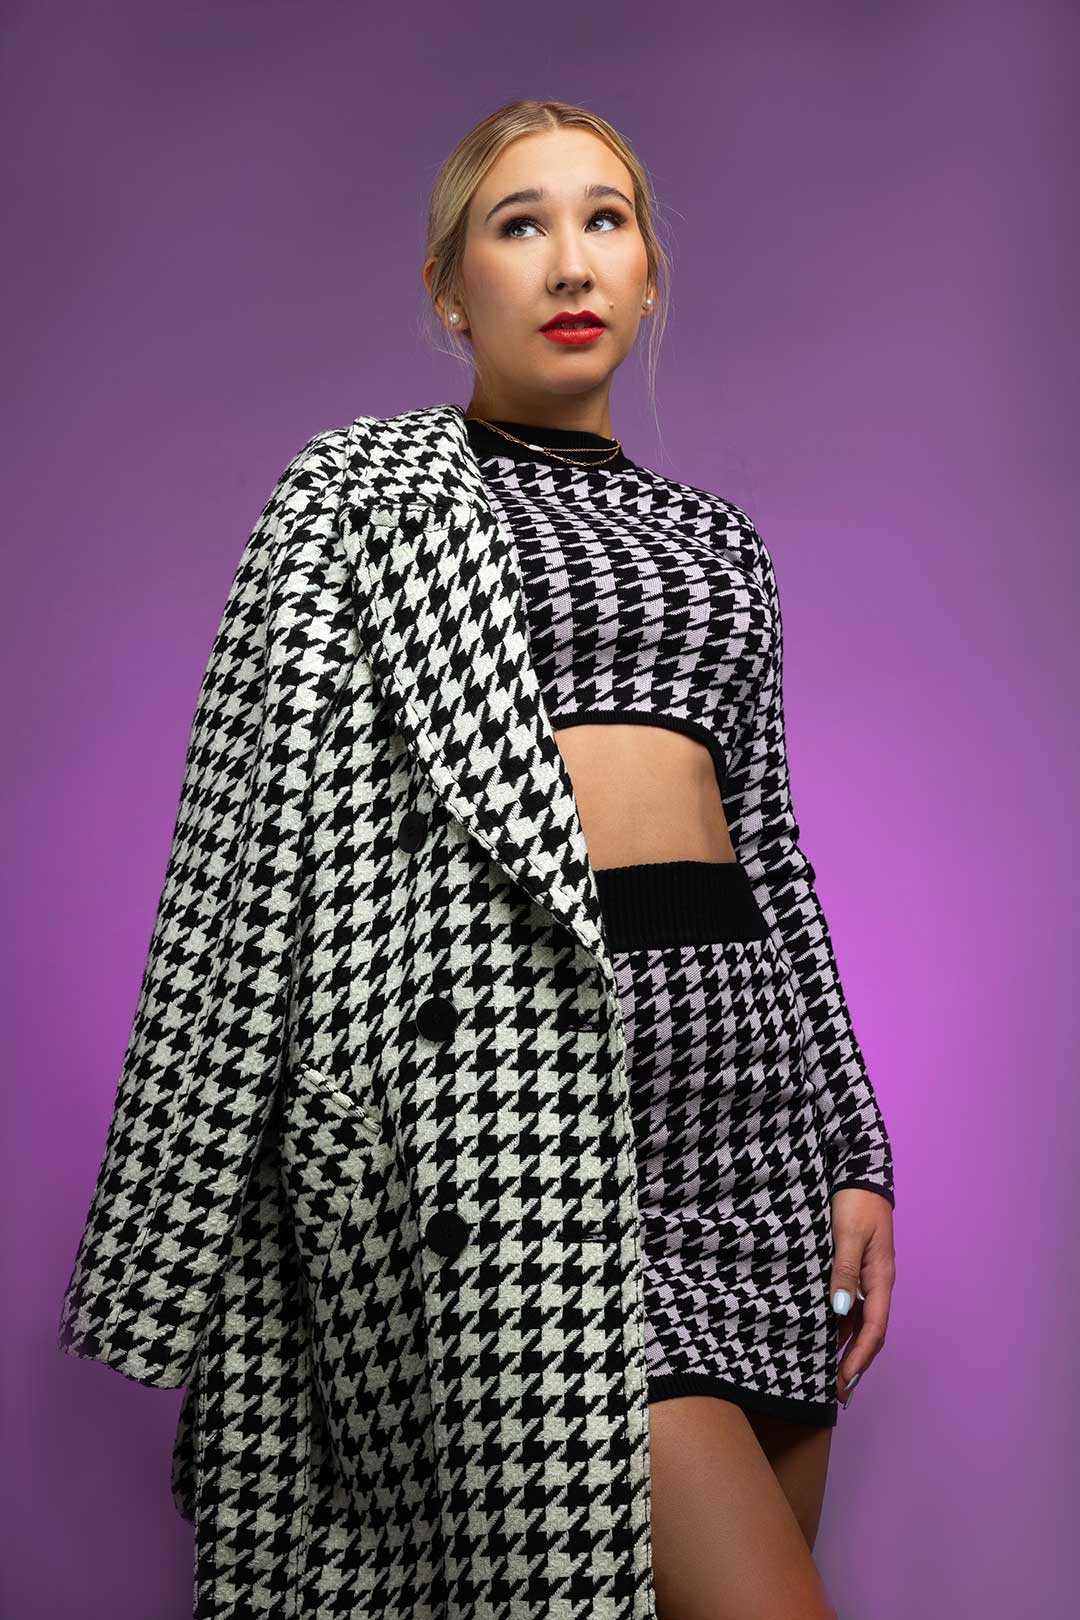 A blonde high school senior model in a high-fashion outfit poses in front of a bright purple background in the studio of Desirée Suchy, the photographer of Photography by Desirée